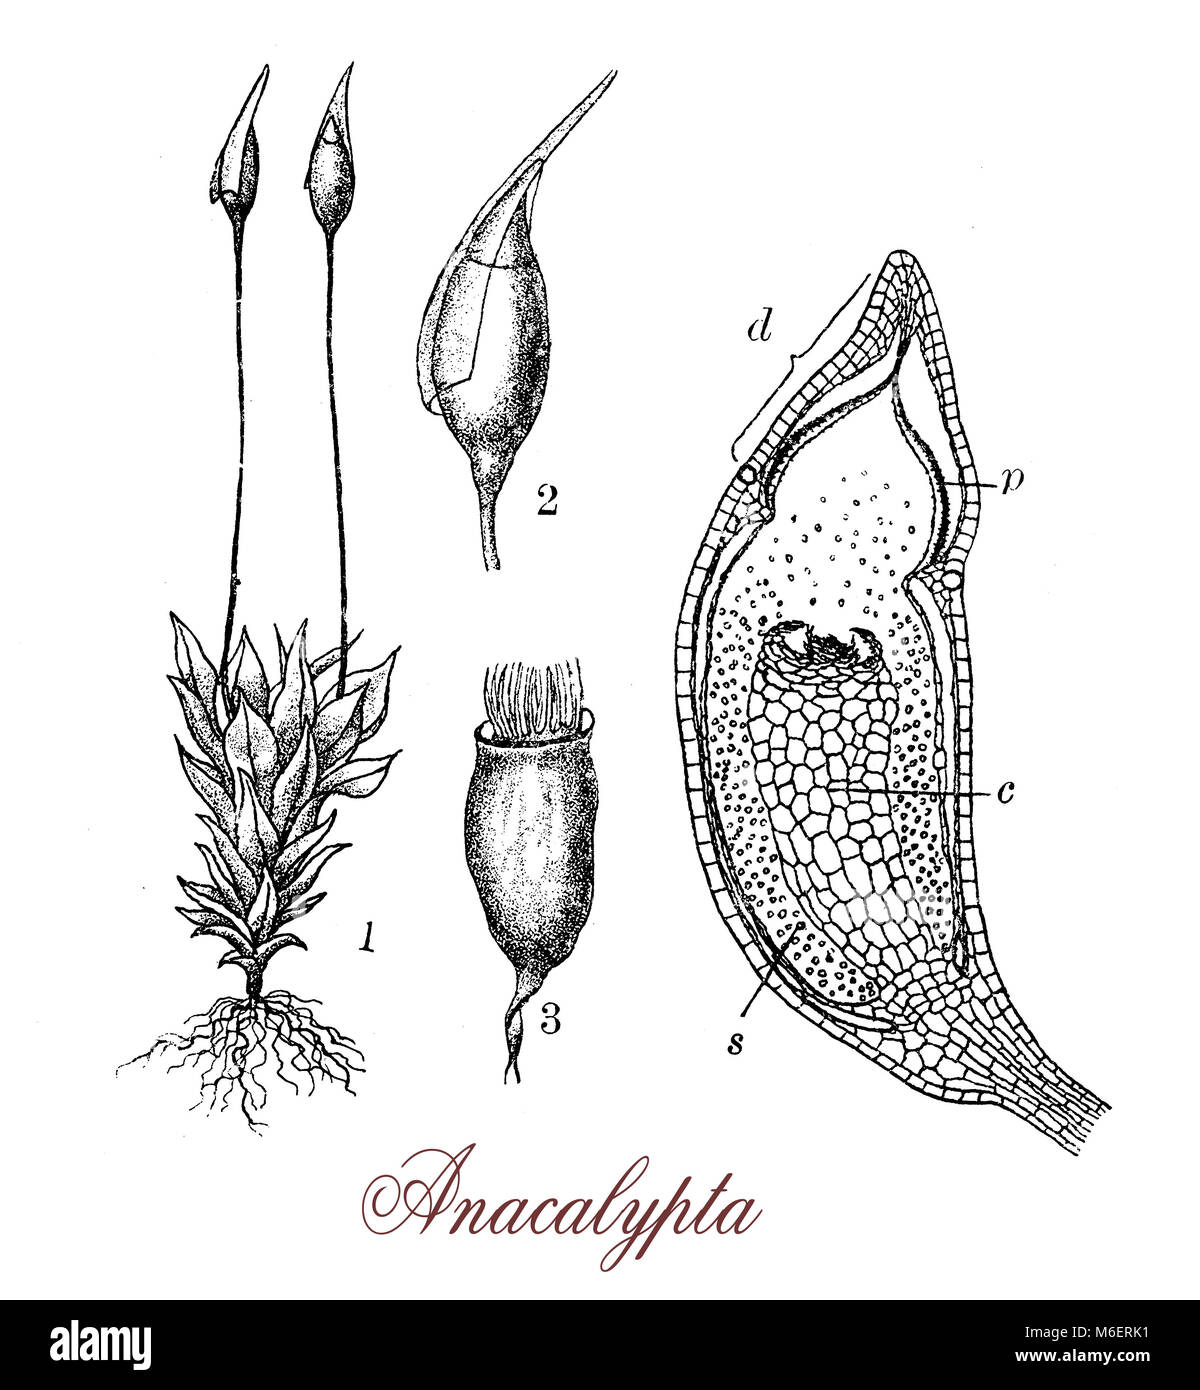 Vintage engraving of anacalypta, annual or biennial moss plant  of the Pottiaceae family, with yellow oval capsules with a teeth on the tip Stock Photo